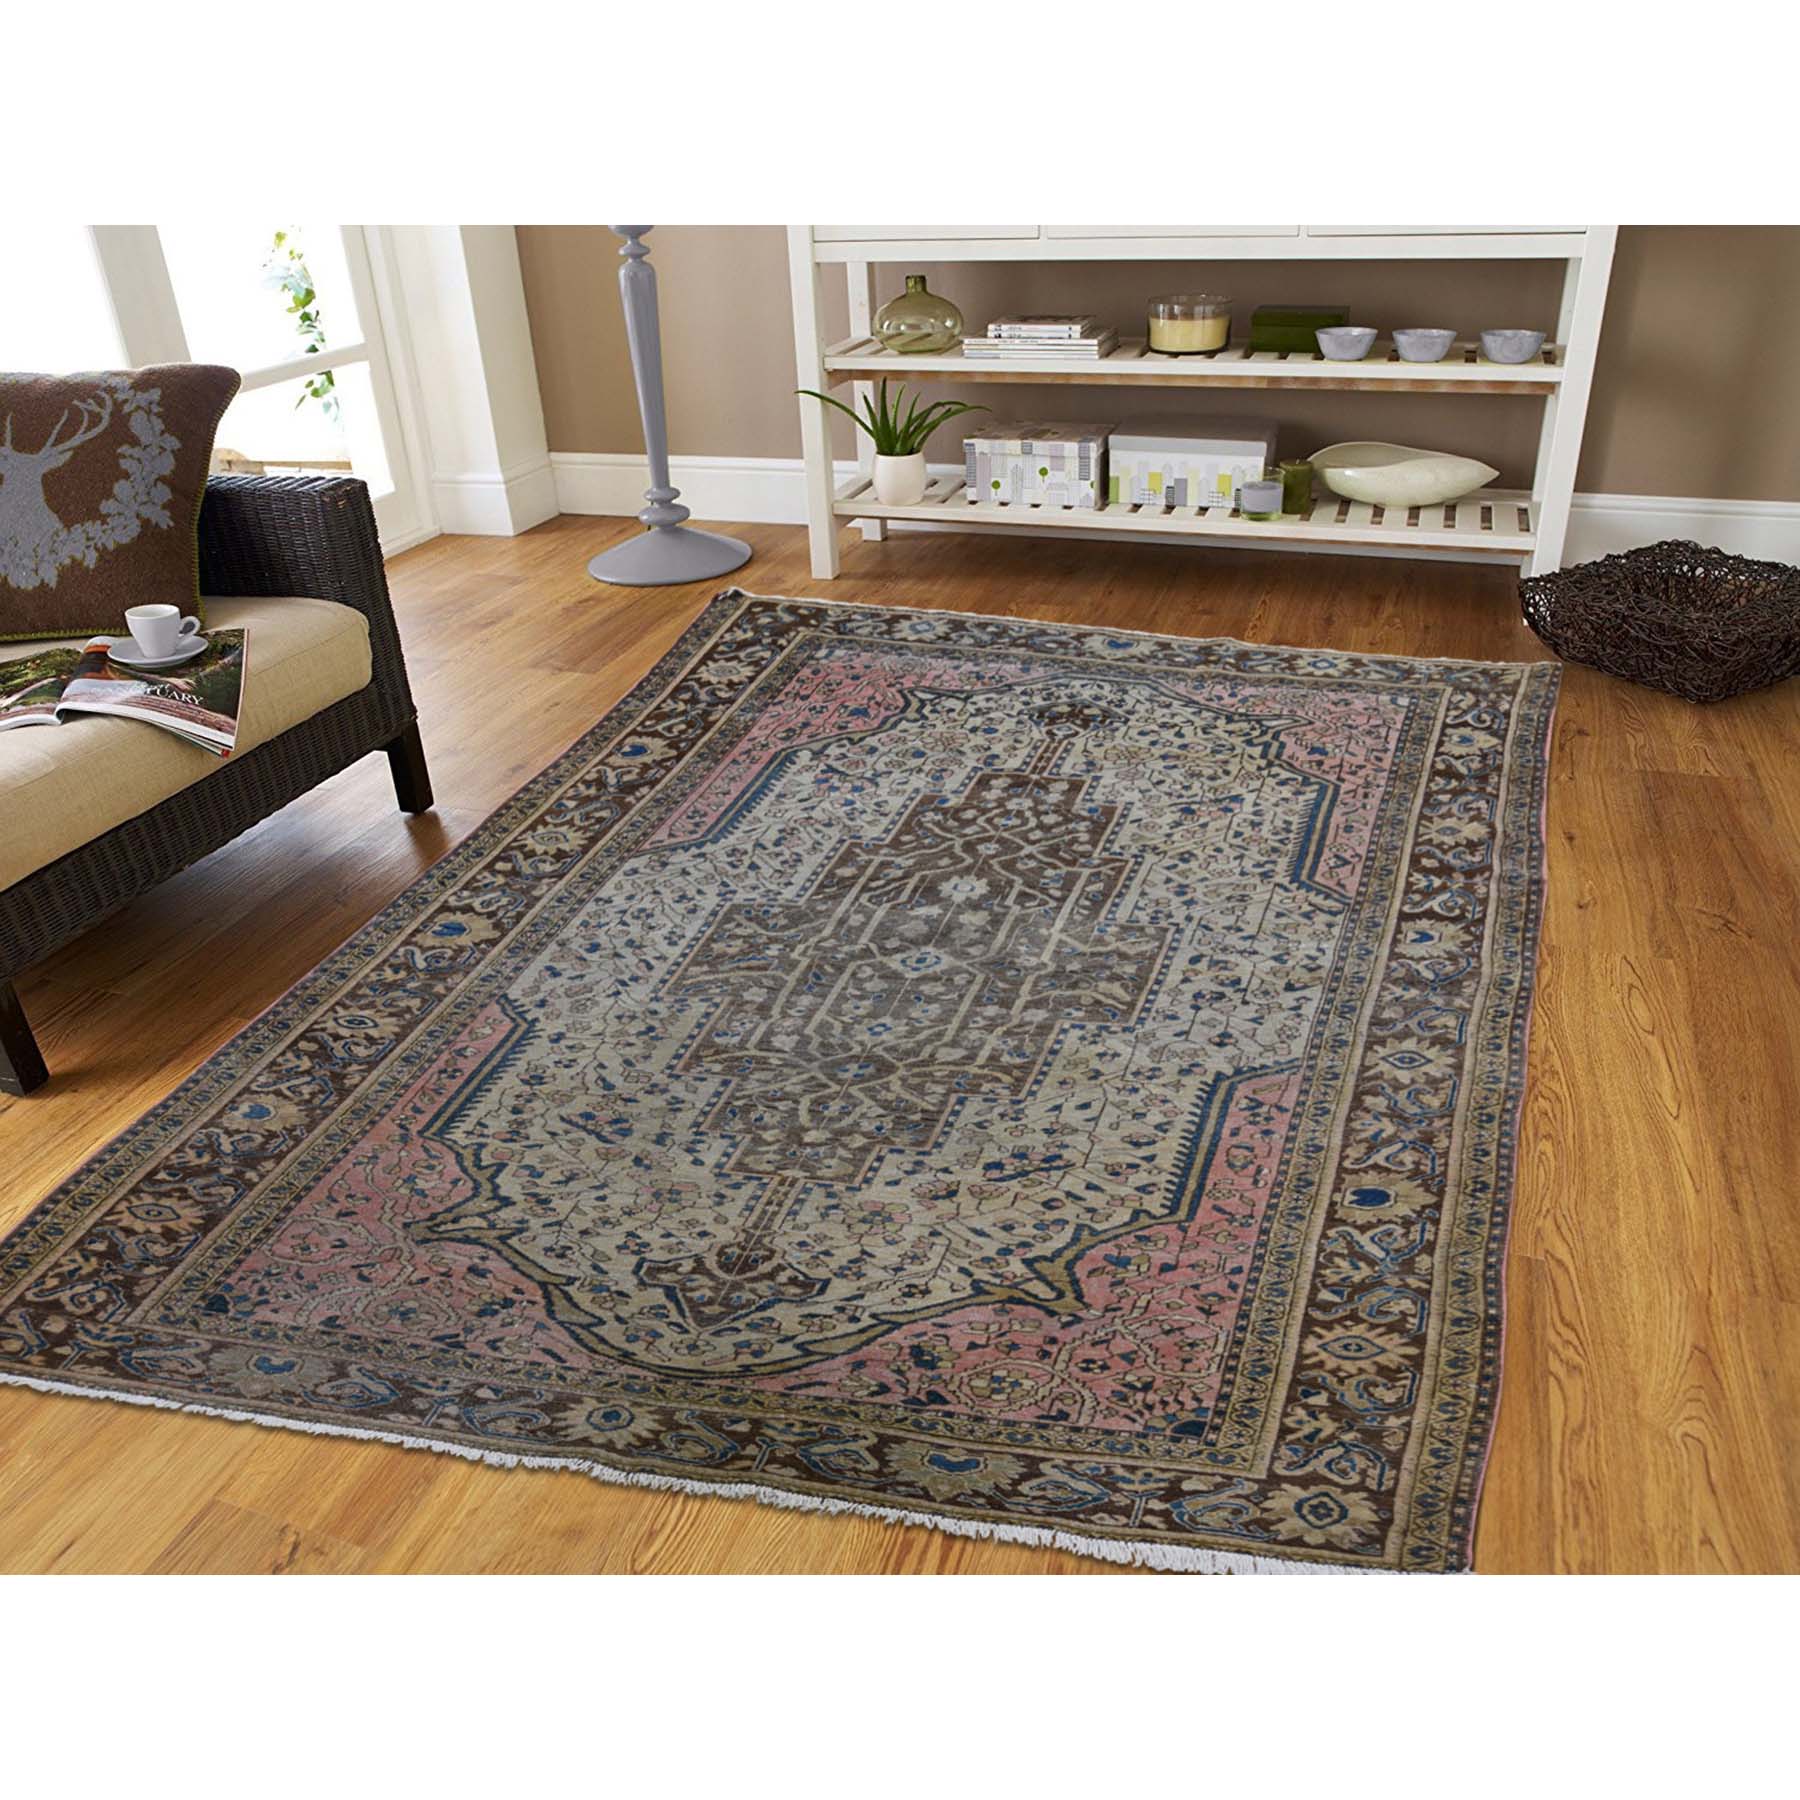 4-5 x6-6  Tan Antique Persian Sarouk Fereghan Even Wear Hand-Knotted Oriental Rug 